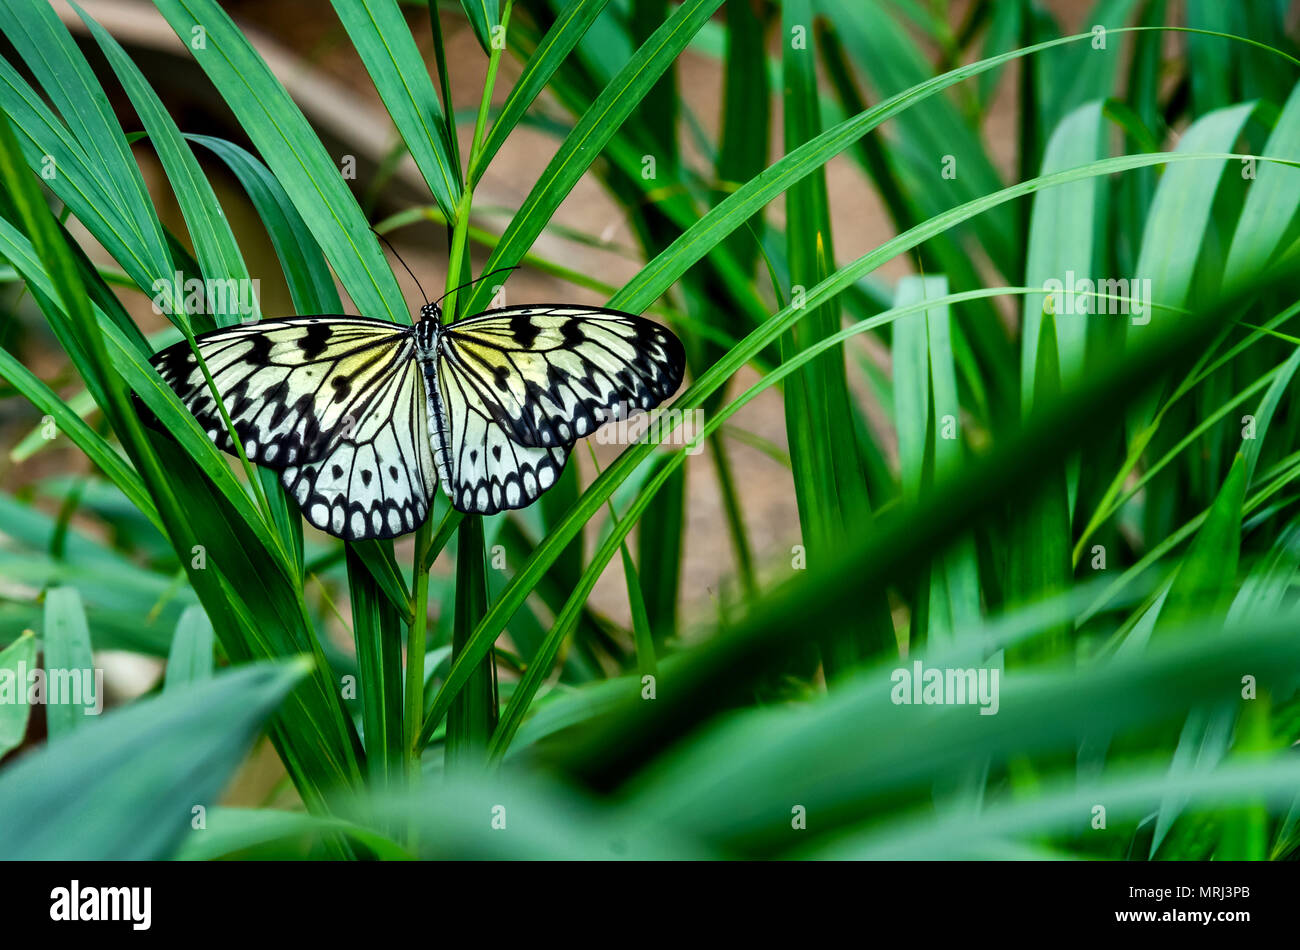 LONDON, UK - APRIL 4, 2018: A colorful butterfly with its wings spread in green background at the exhibition features at Natural History Museum. Stock Photo